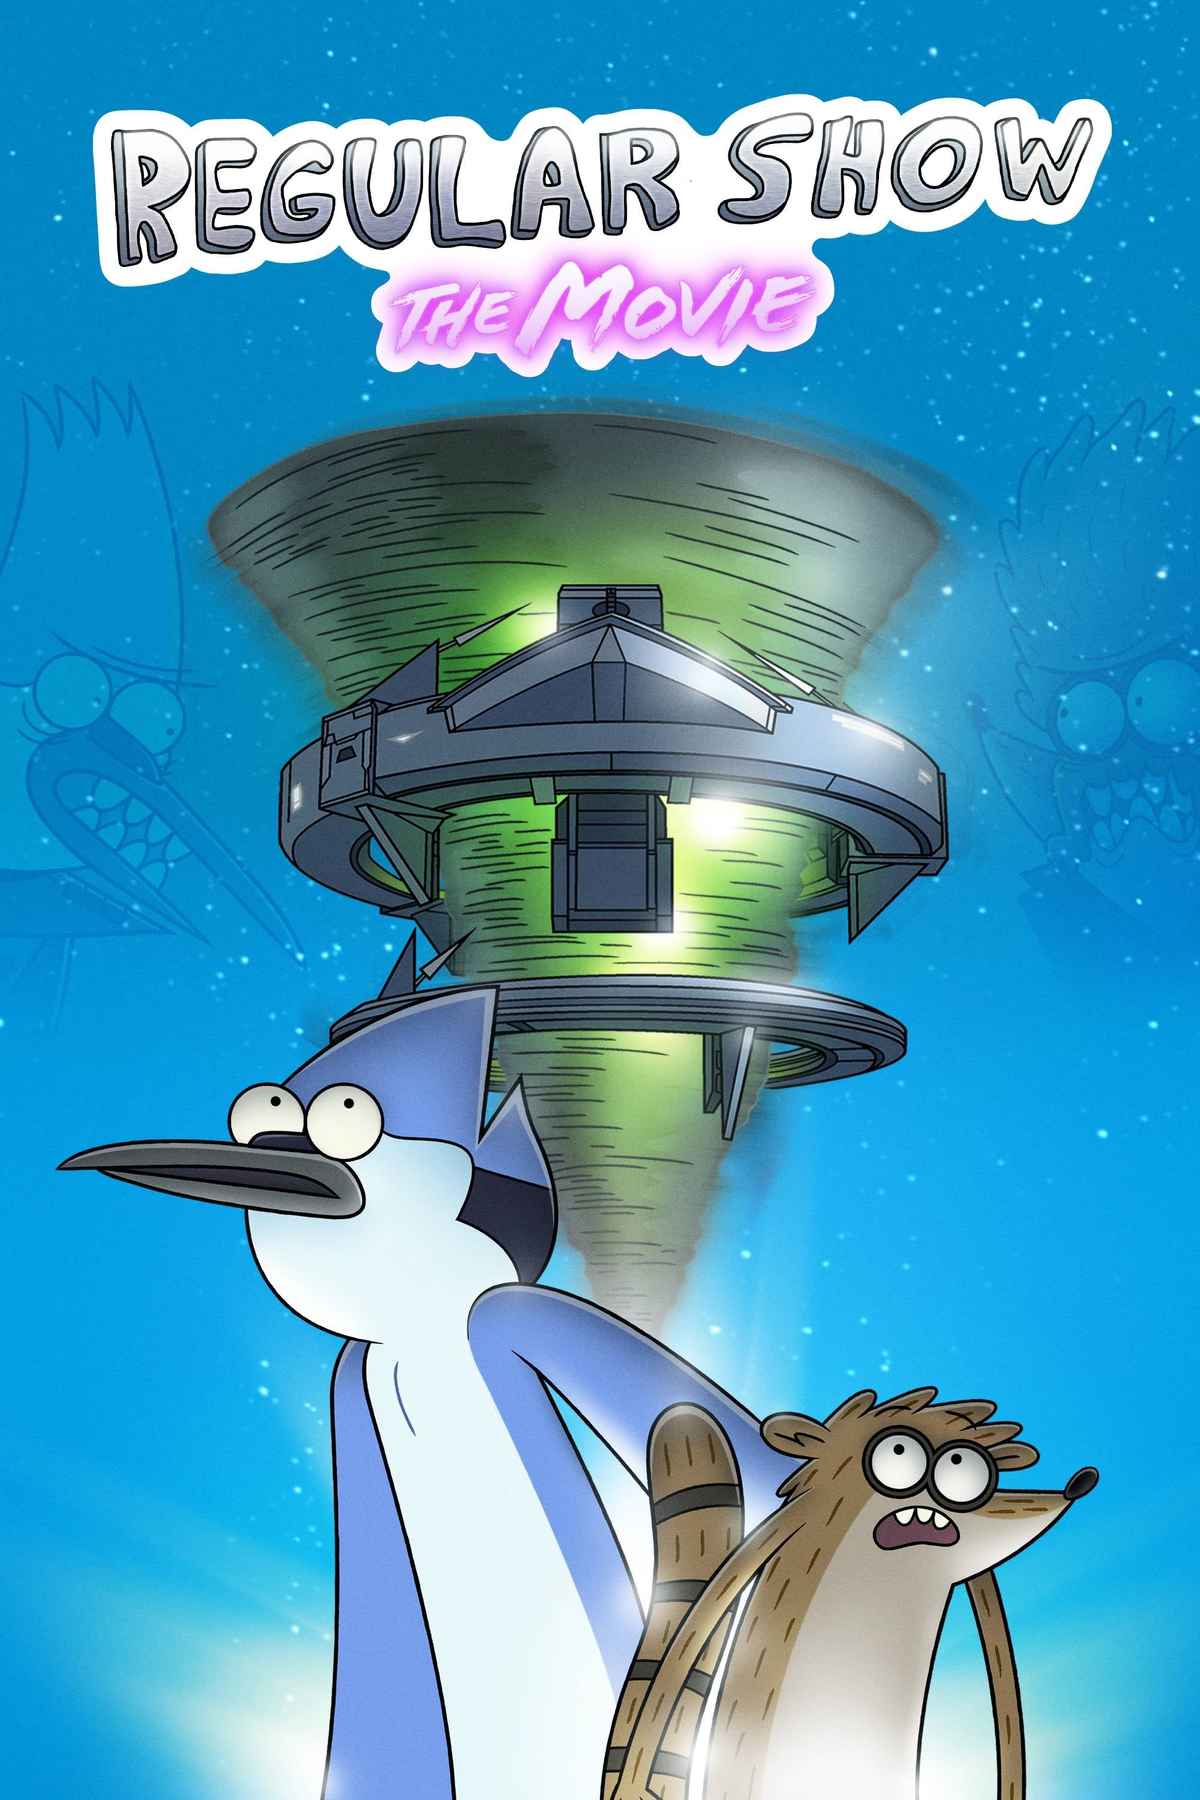 when did regular show the movie come out